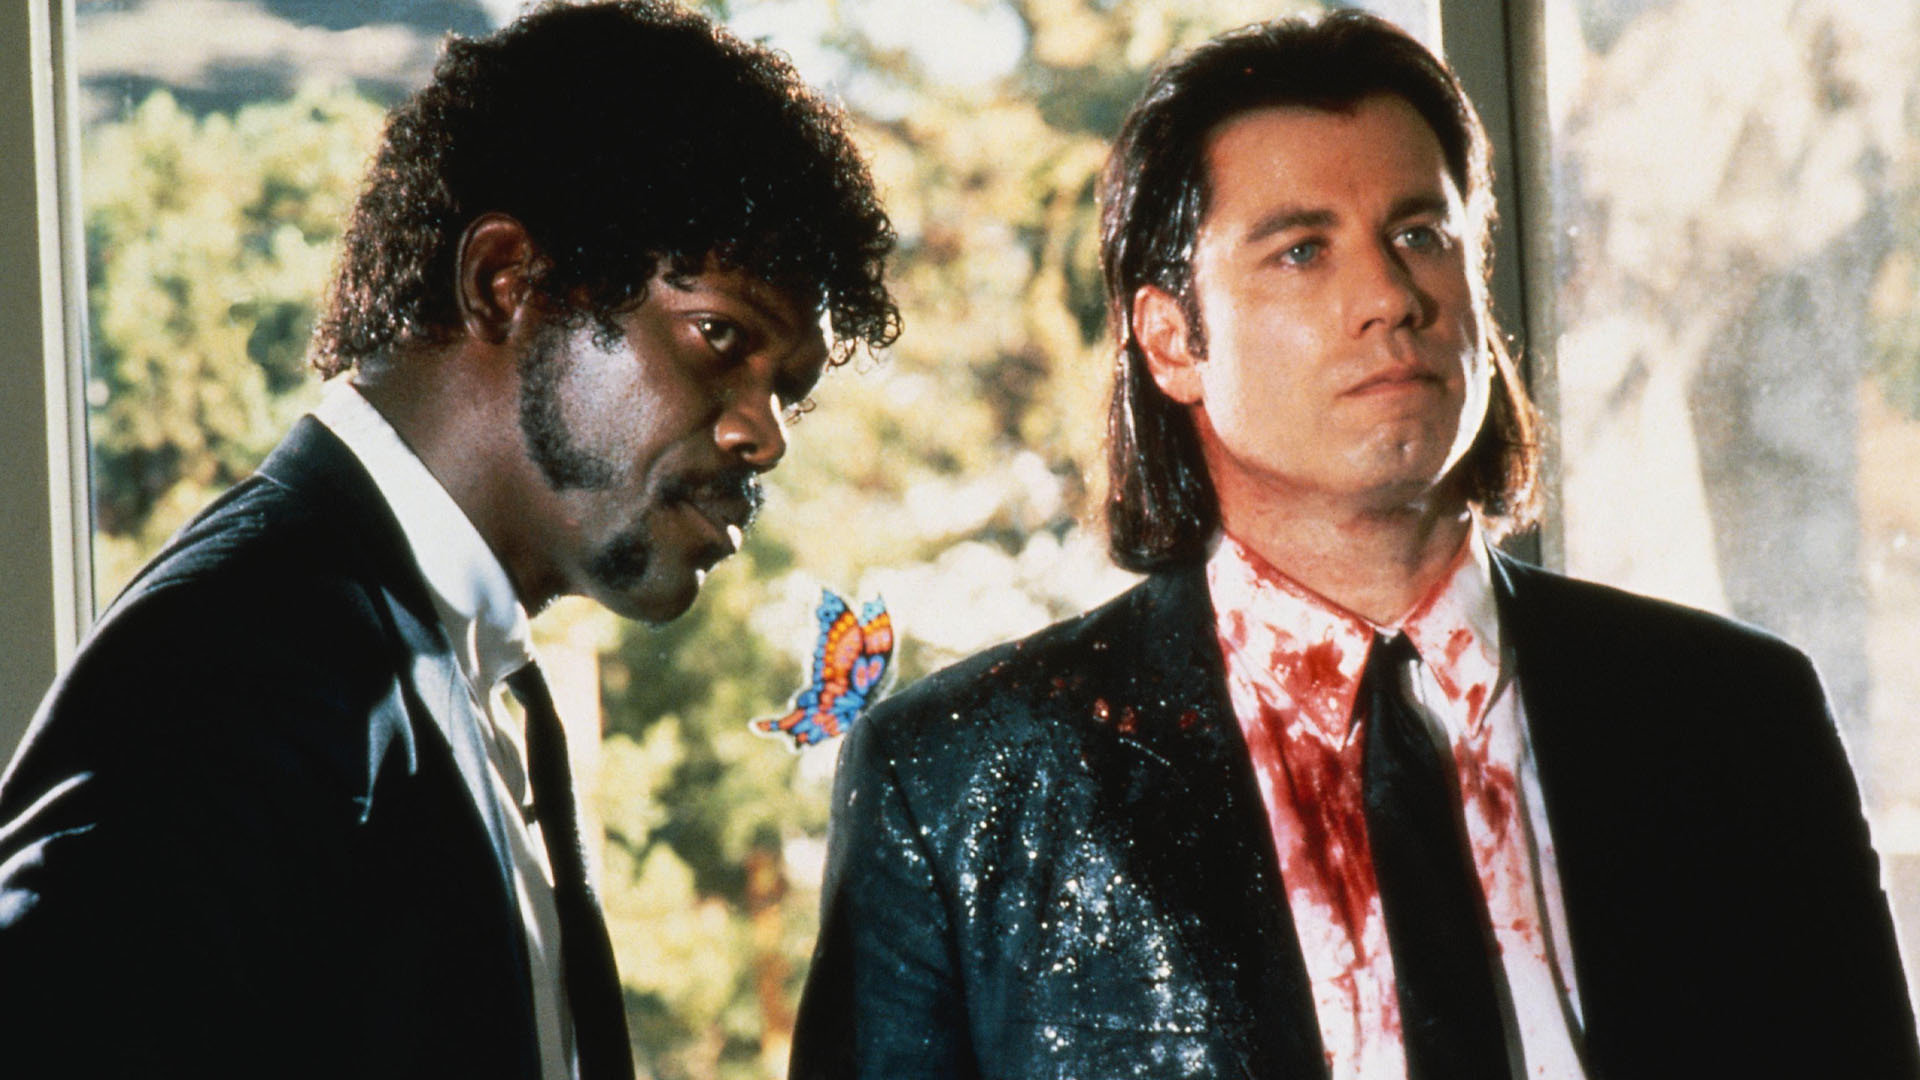 Awesome Pulp Fiction free wallpaper ID:158118 for hd 1920x1080 desktop